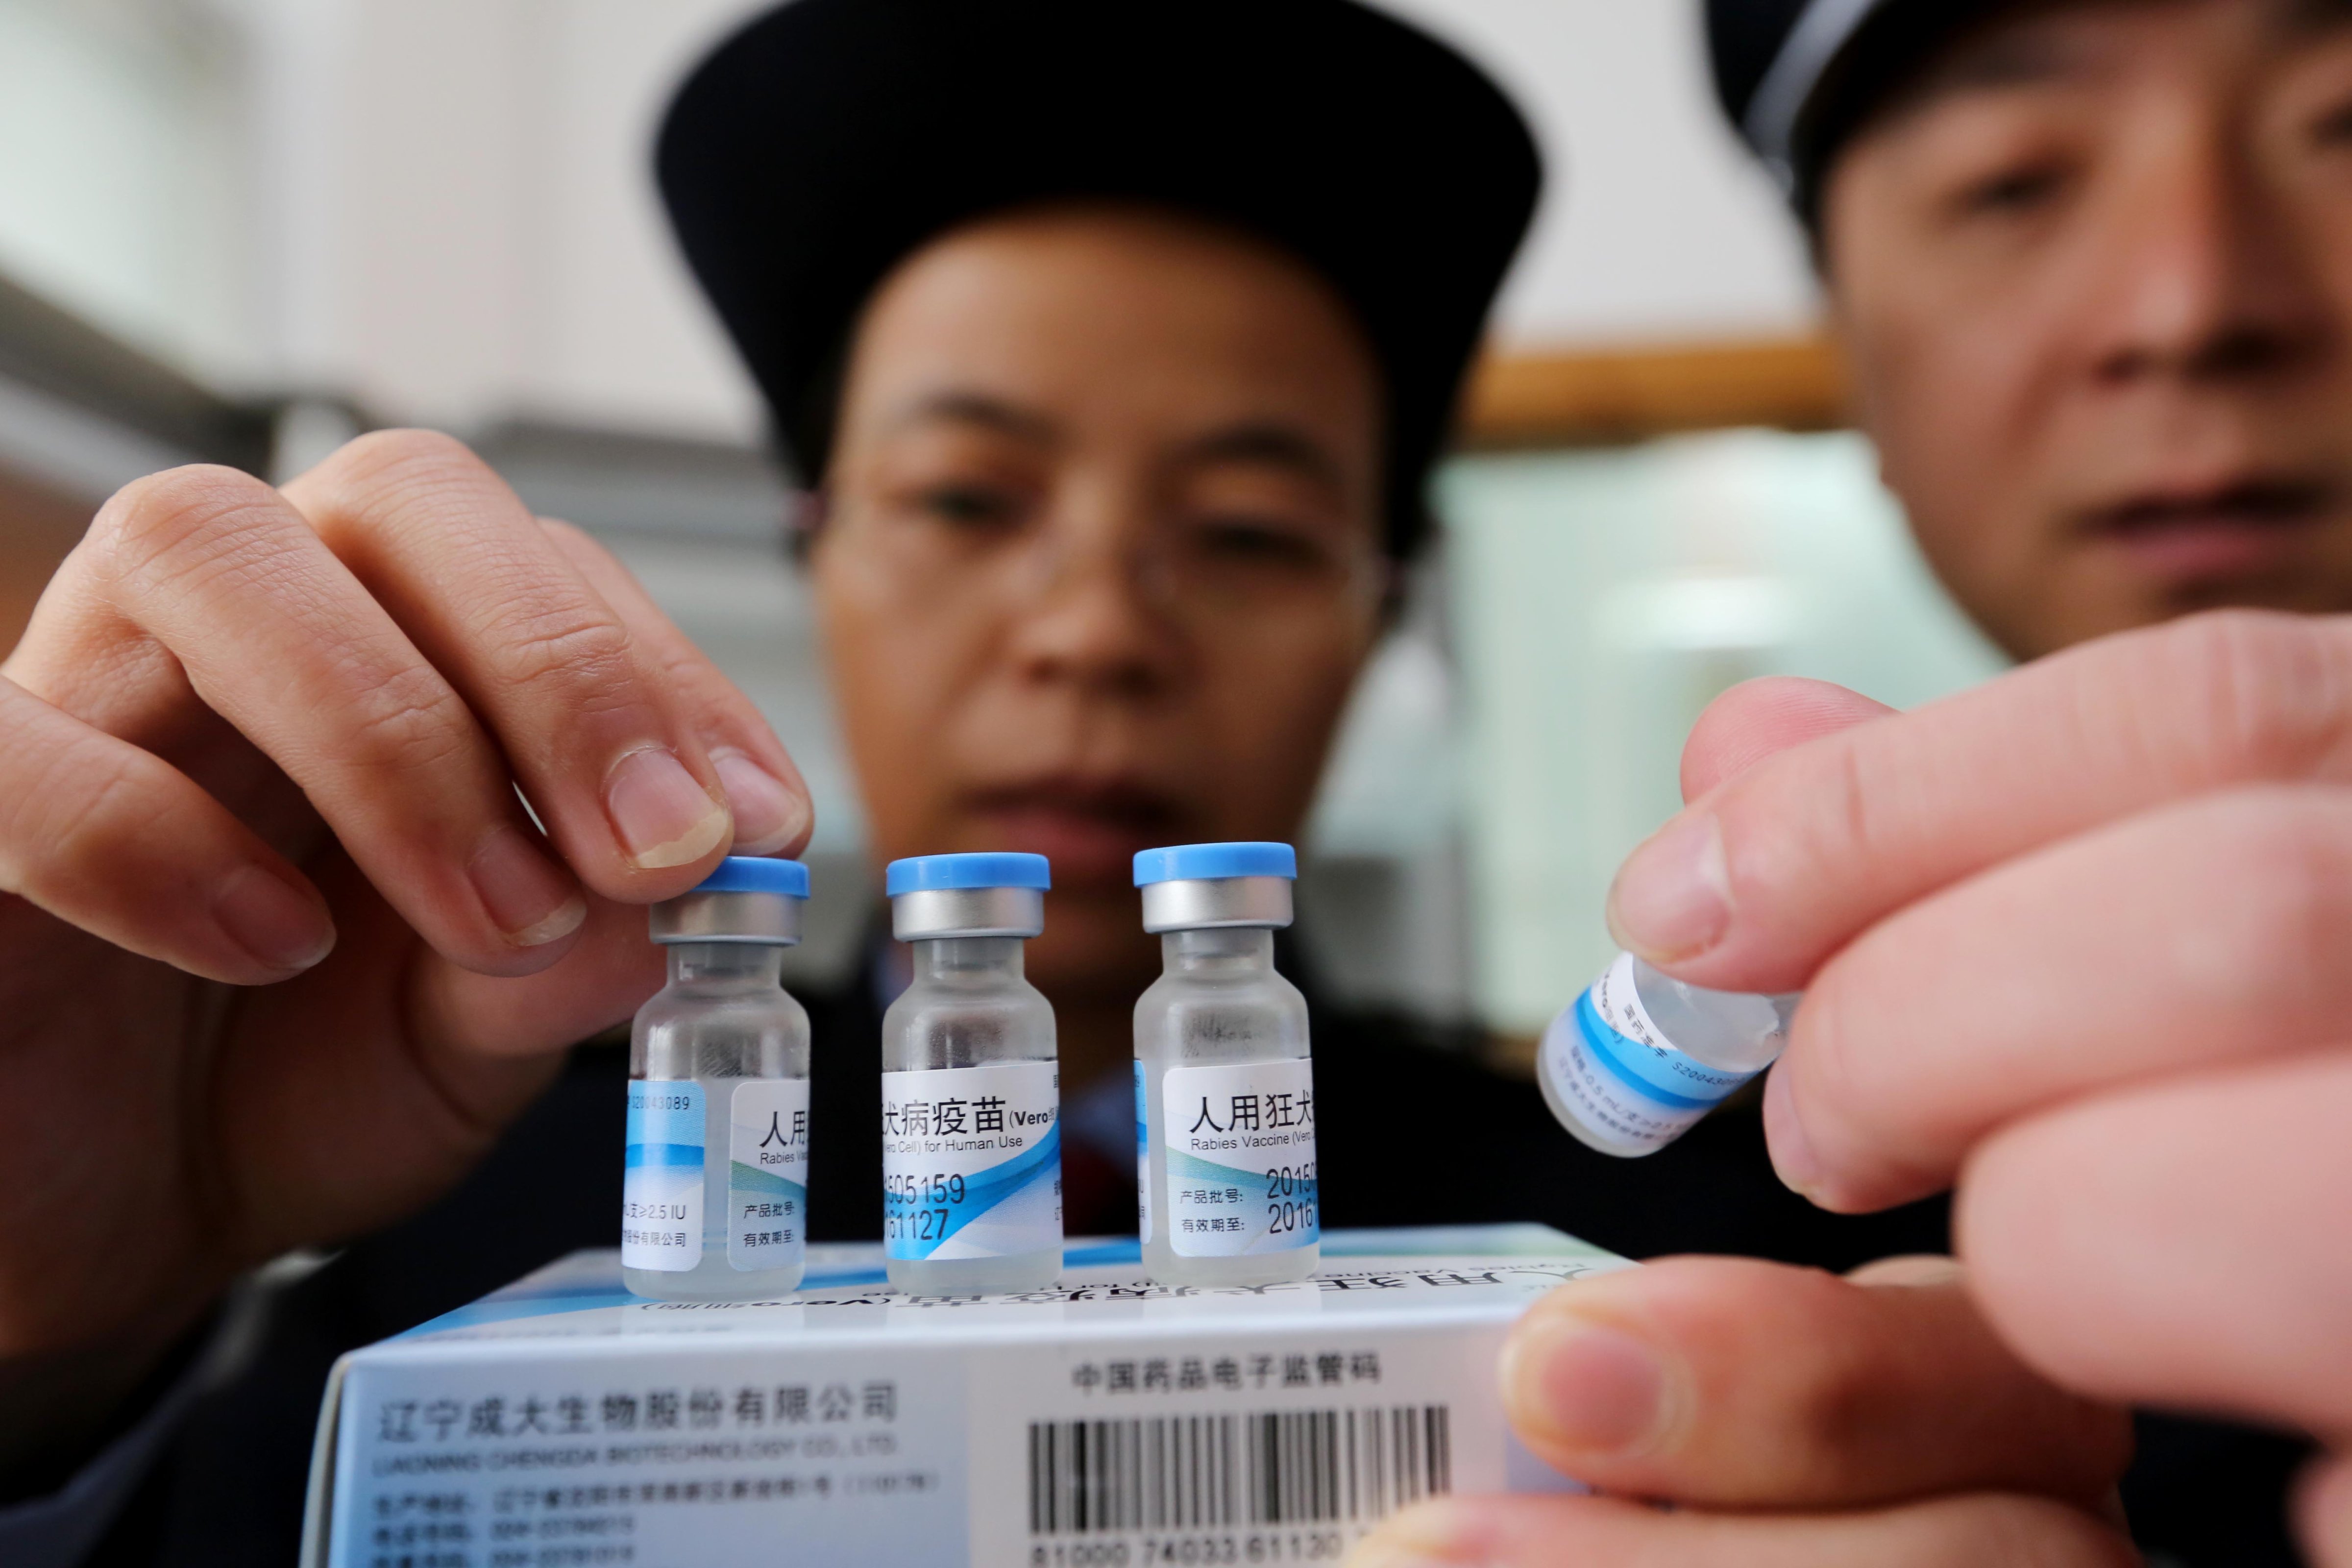 Chinese law enforcement officers check rabies vaccine at a disease prevention and control center in Rongan county, south China's Guangxi Zhuang Autonomous Region, 21 March 2016. (Tan kaixing—Imaginechina/AP)